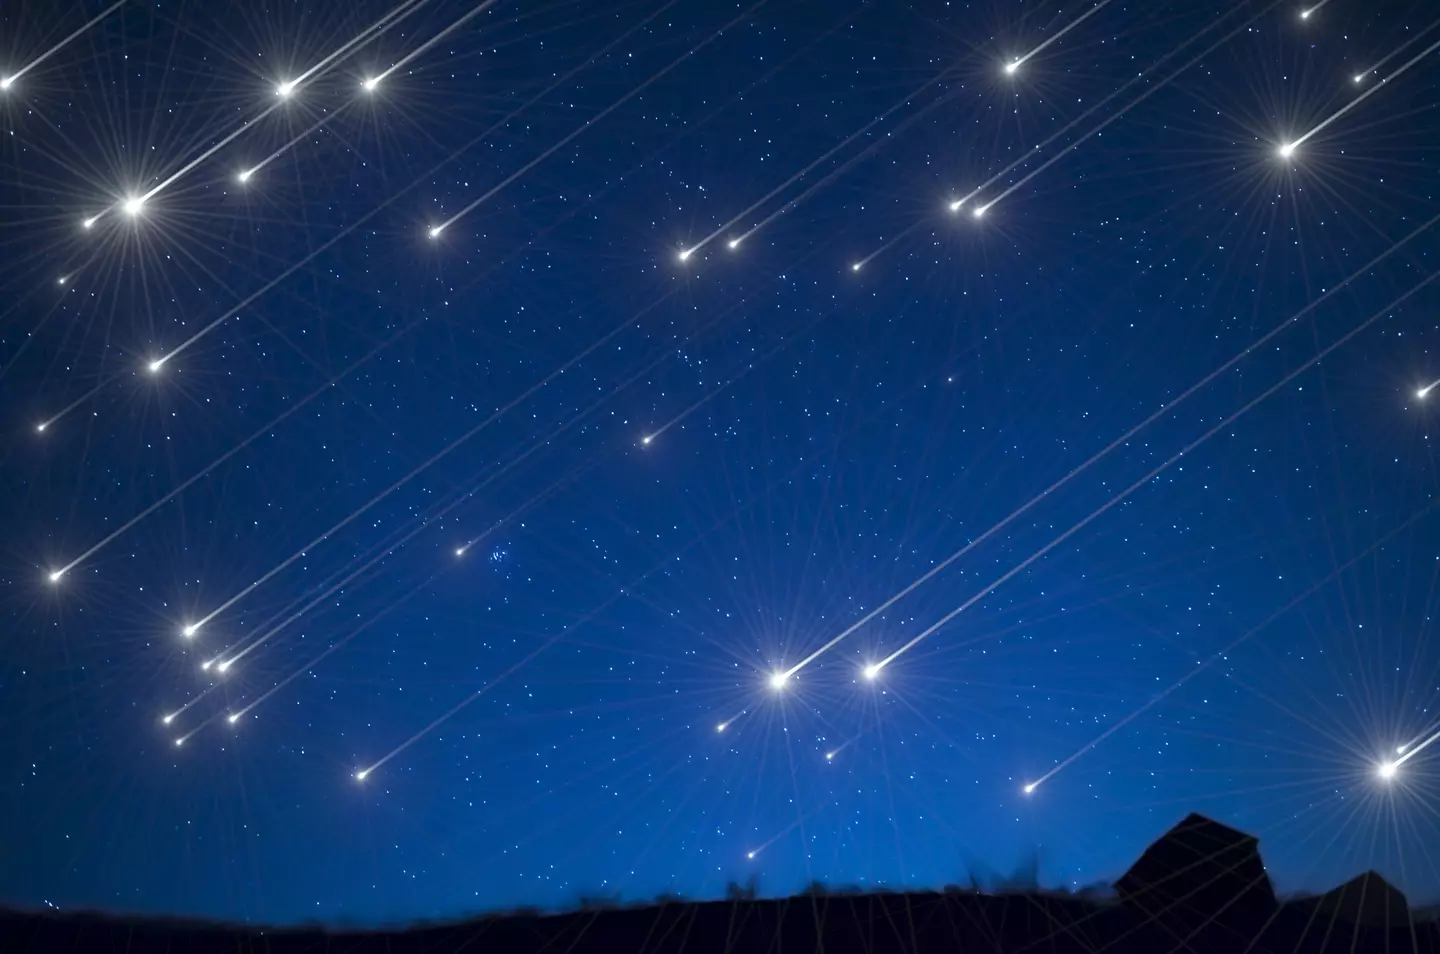 The Tau Herculids meteor shower might light up the sky.